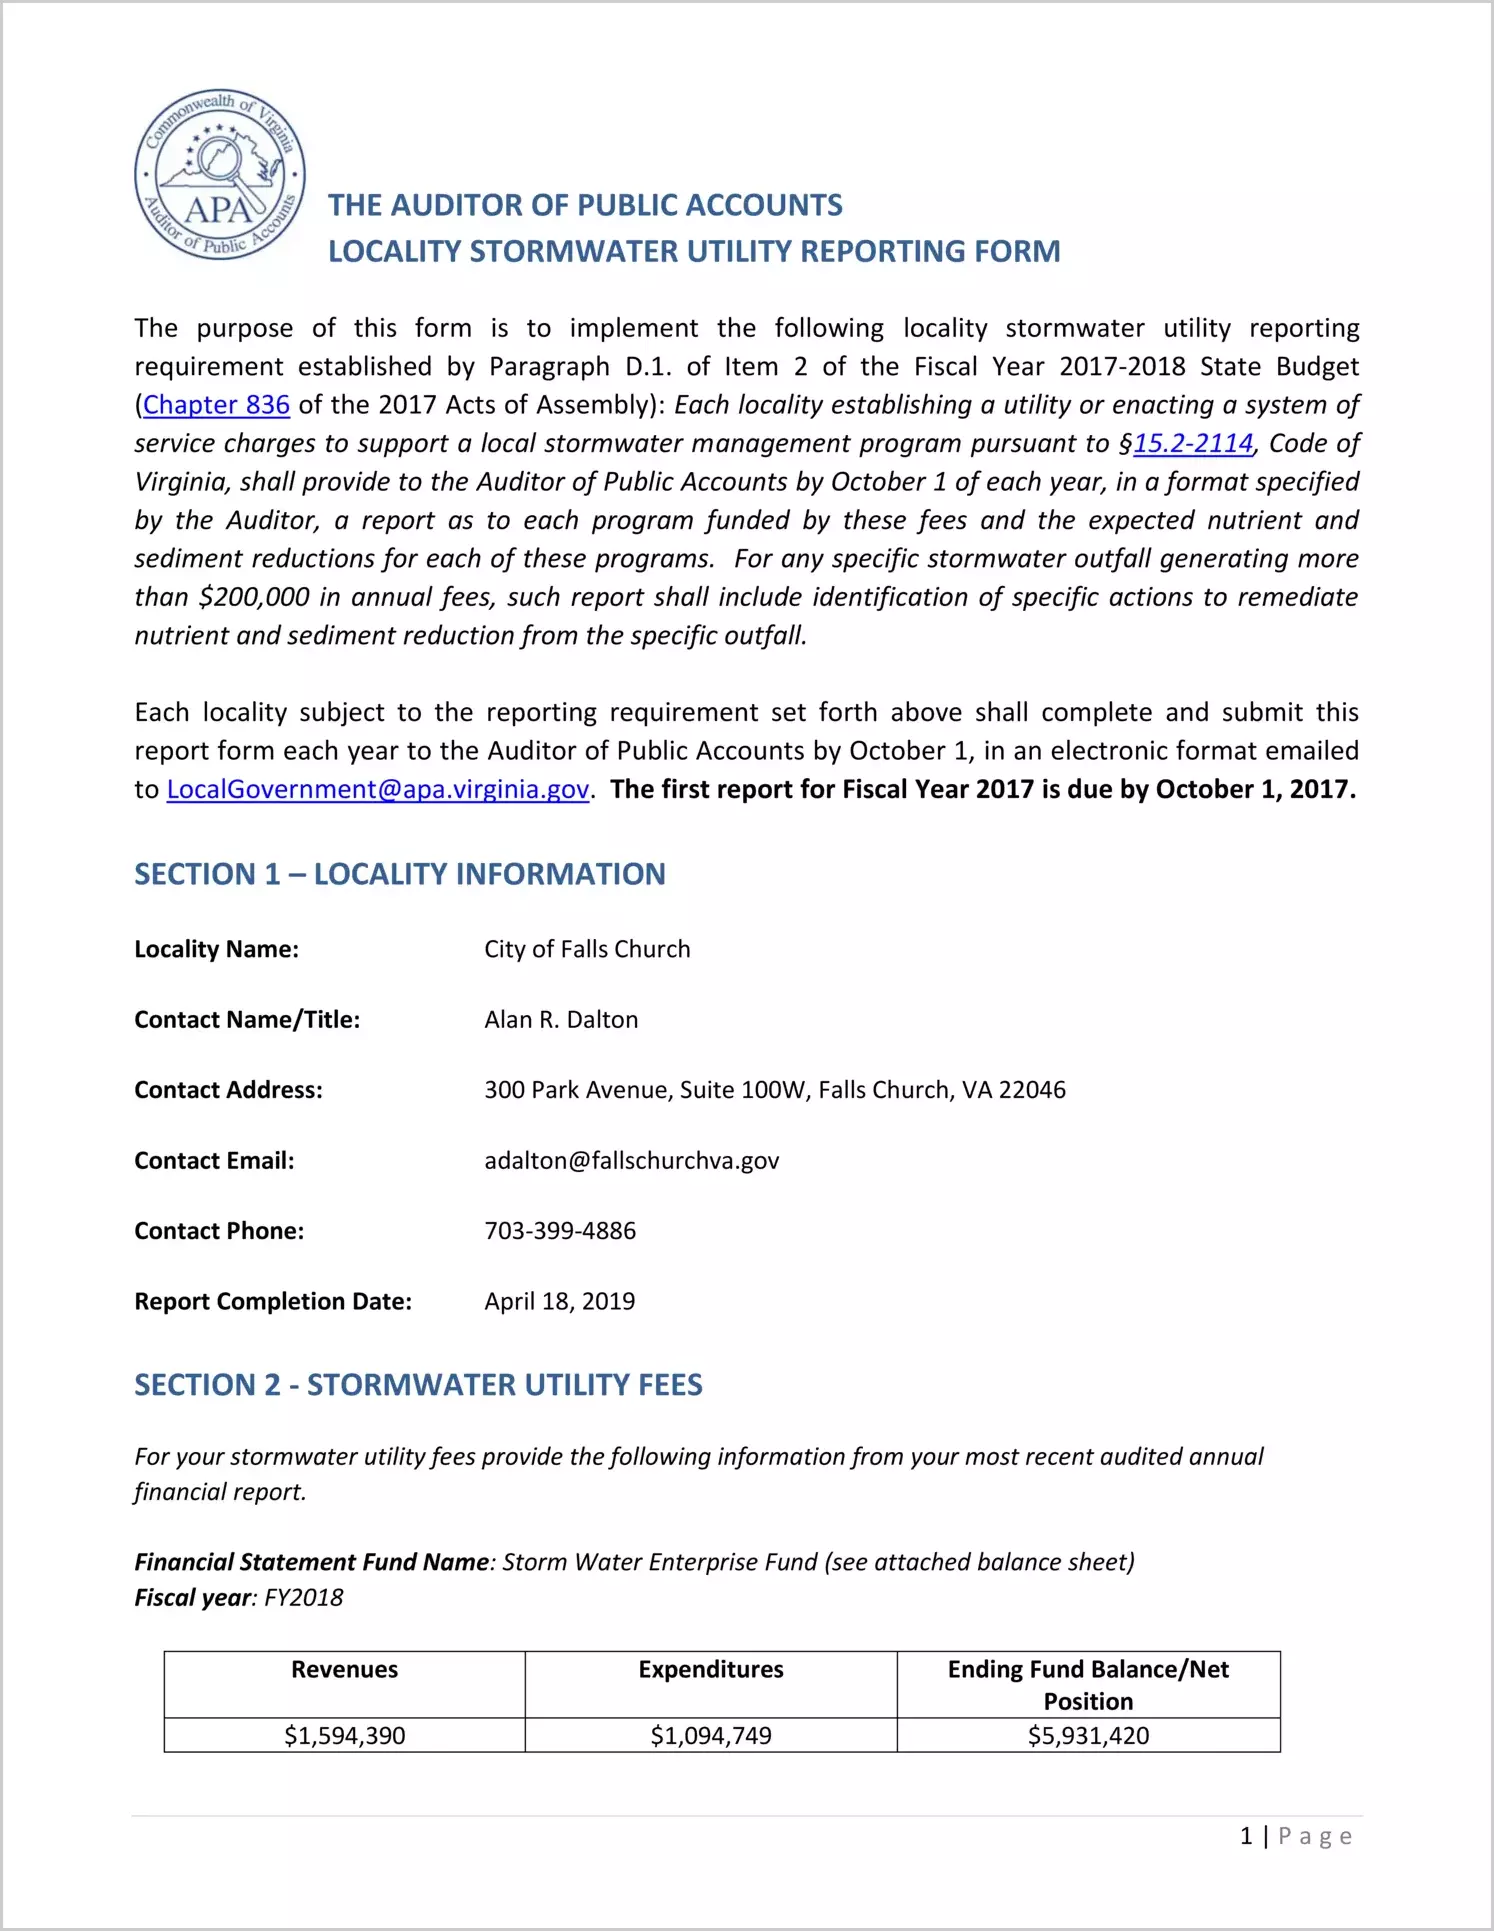 2018 Stormwater Utility Report for City of Falls Church